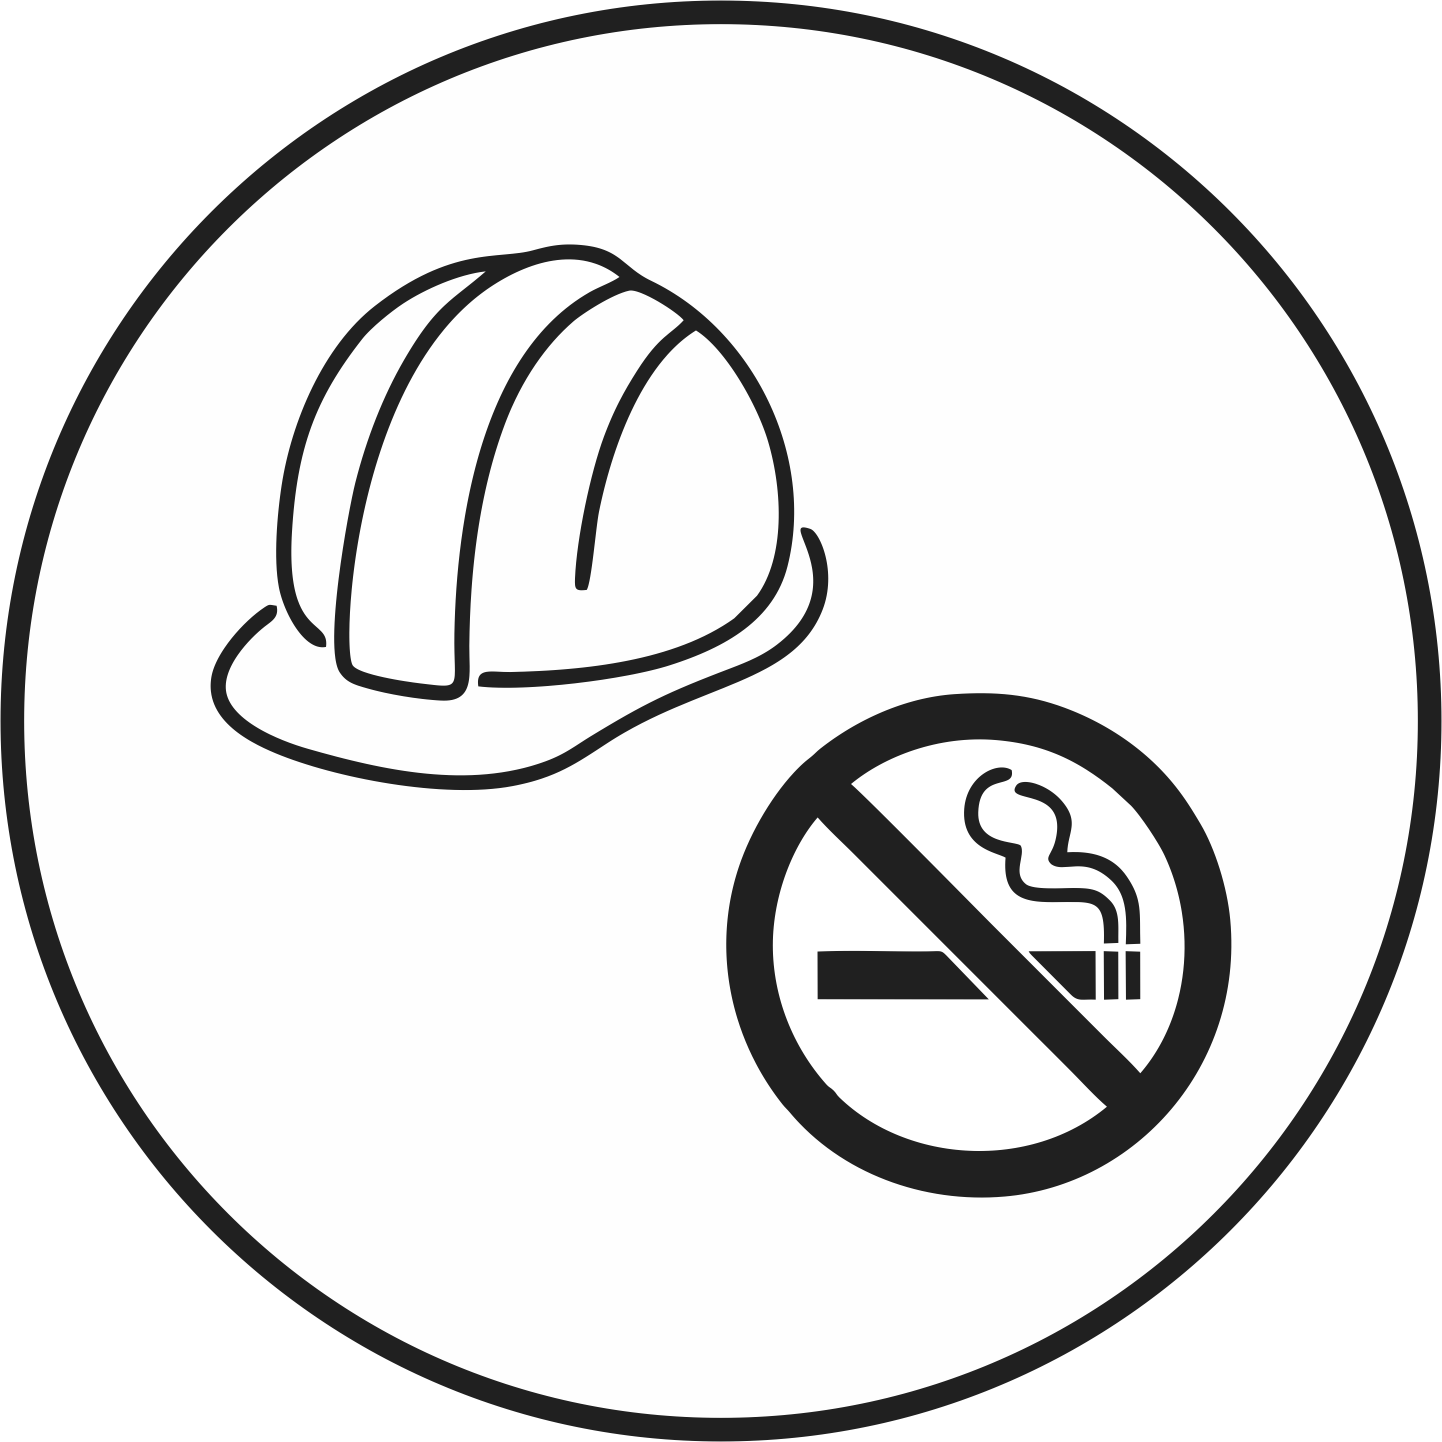 Mining & Safety Signs